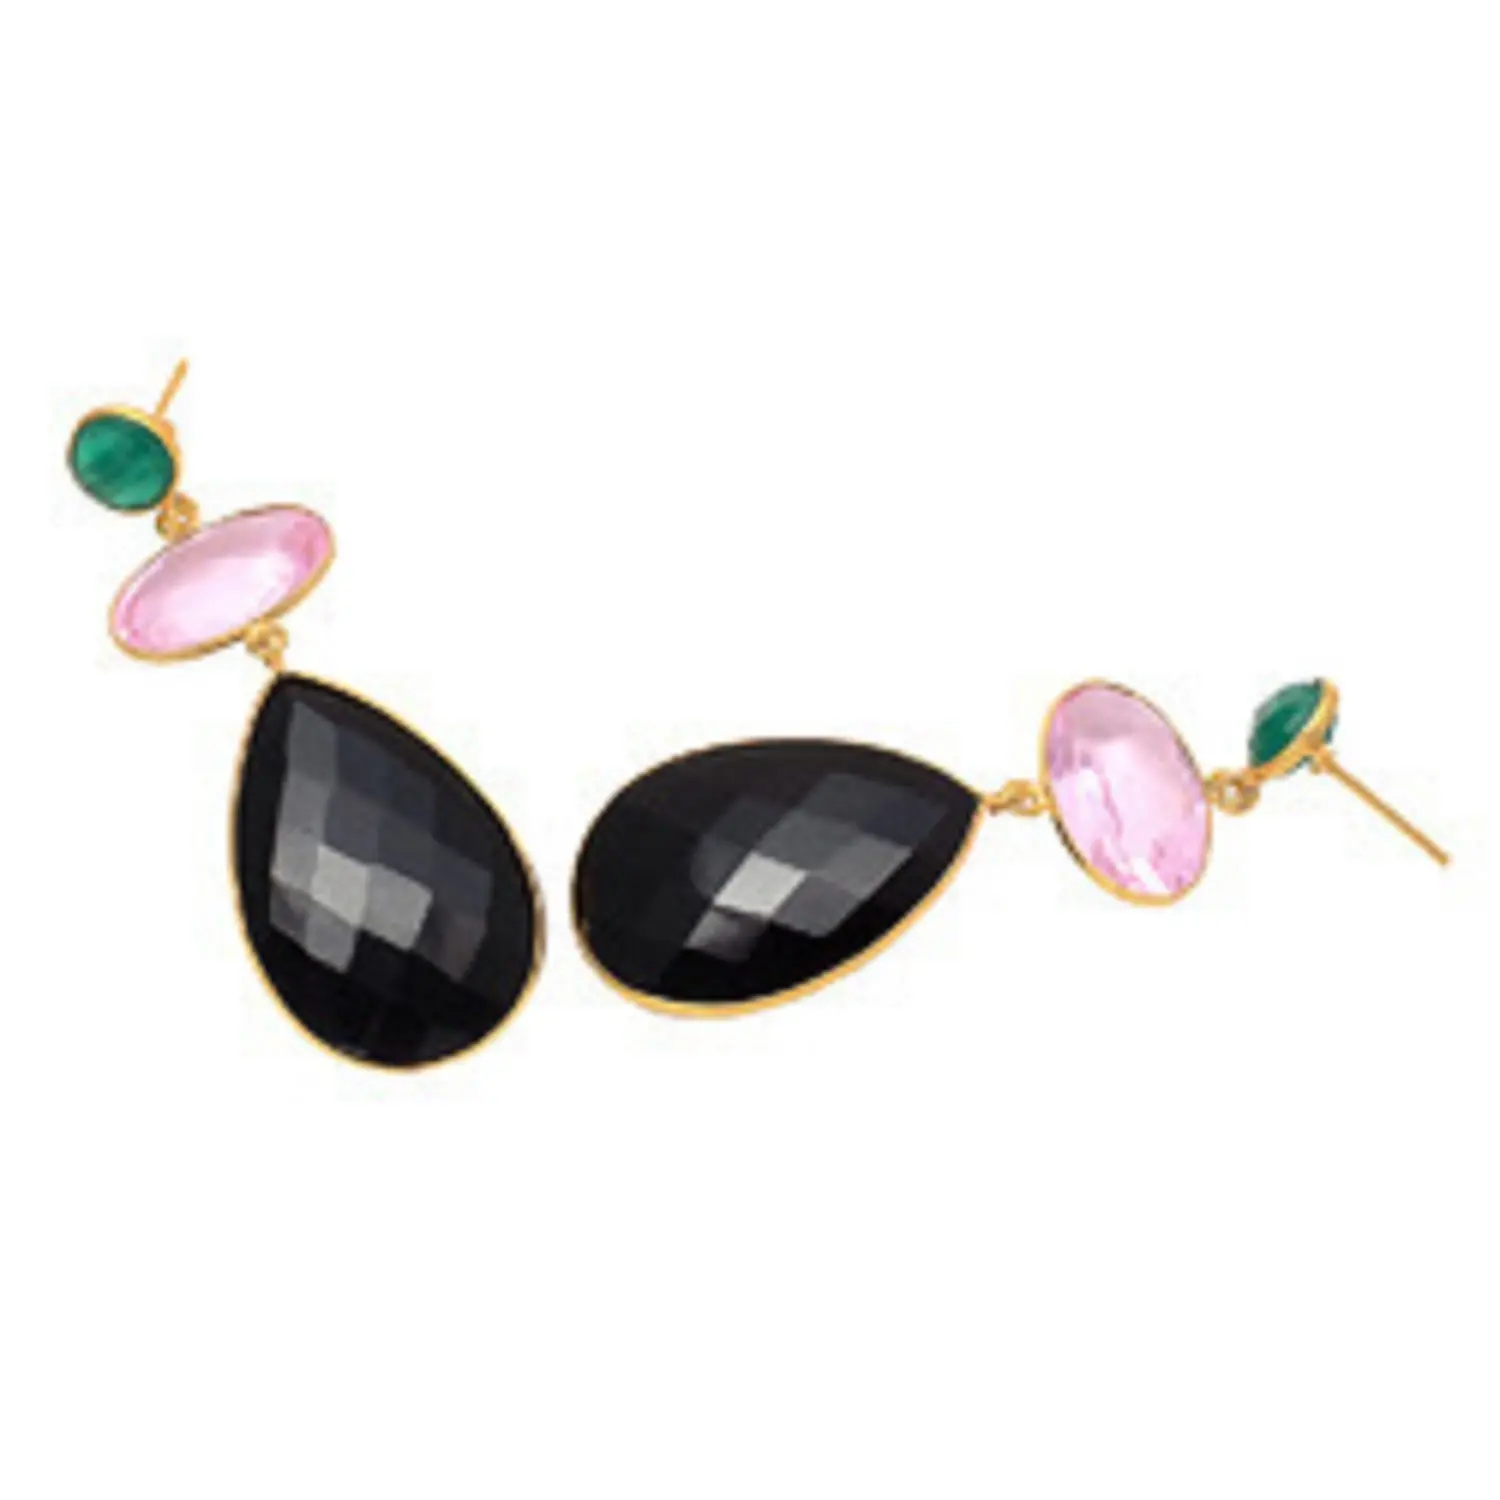 Exclusive Black Onyx Pink Quartz Hydro & Green Onyx Jewelry Gold Plated 925 Sterling Silver Pear Shape Gemstone Earring